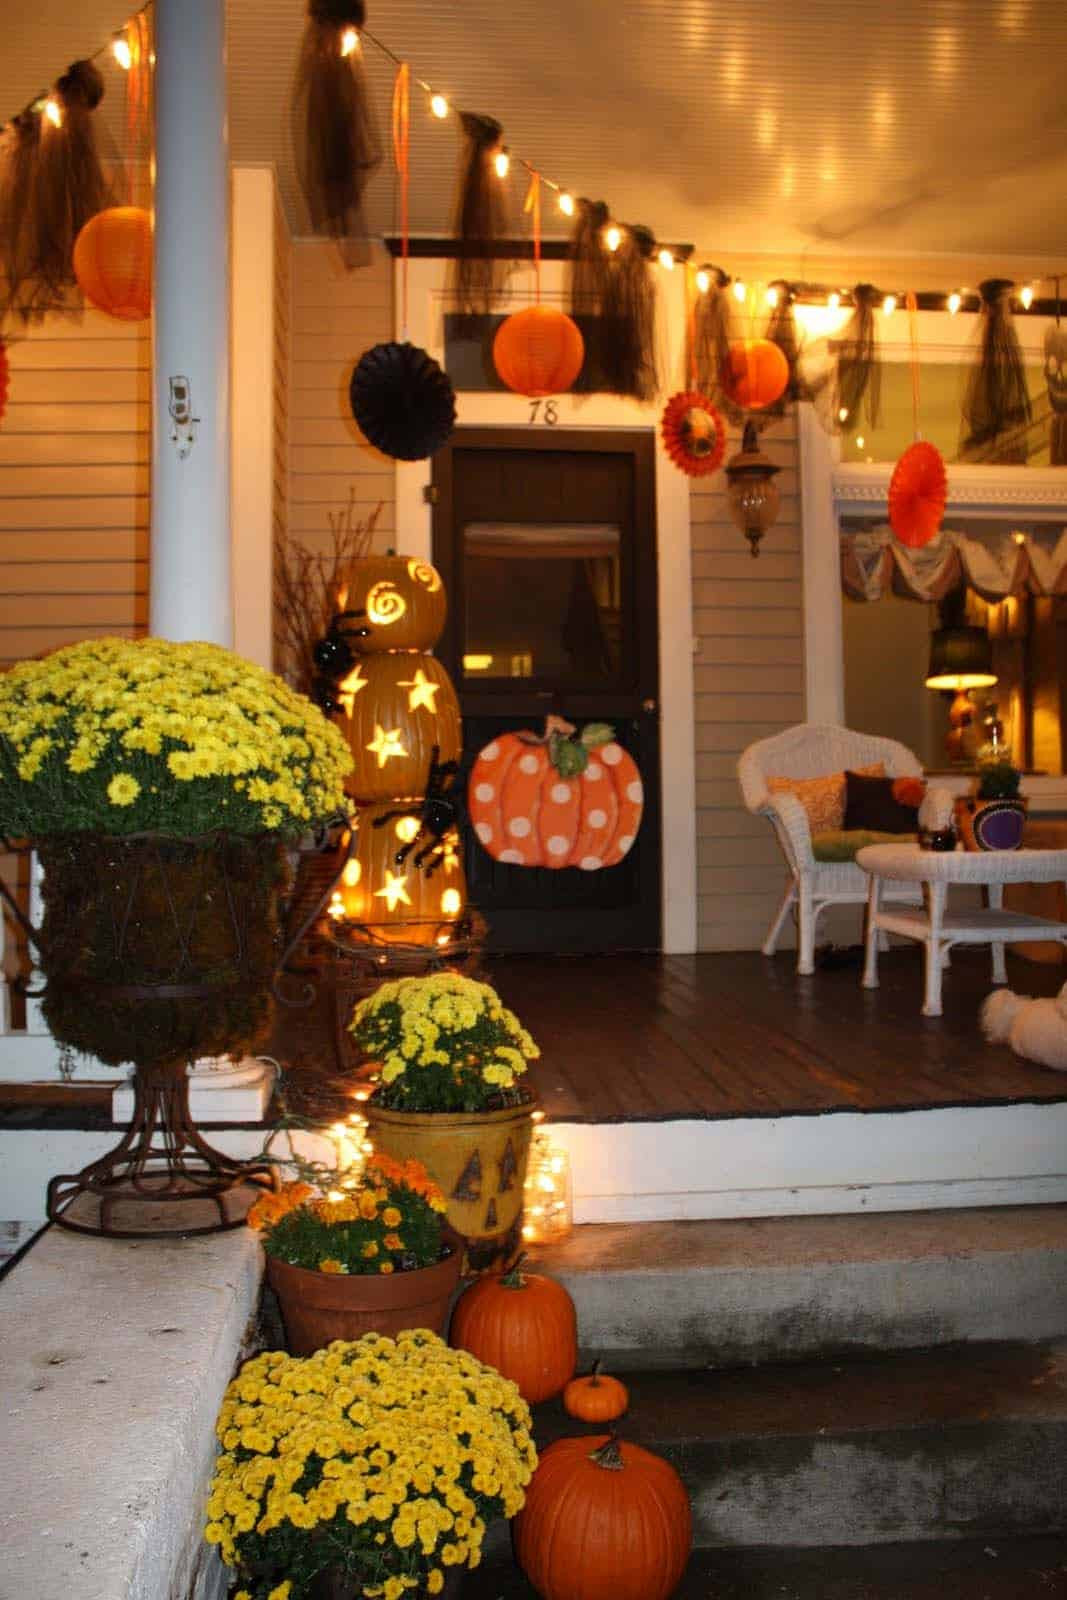 Outside Fall Decor Ideas
 46 of the Coziest Ways to Decorate your Outdoor Spaces for